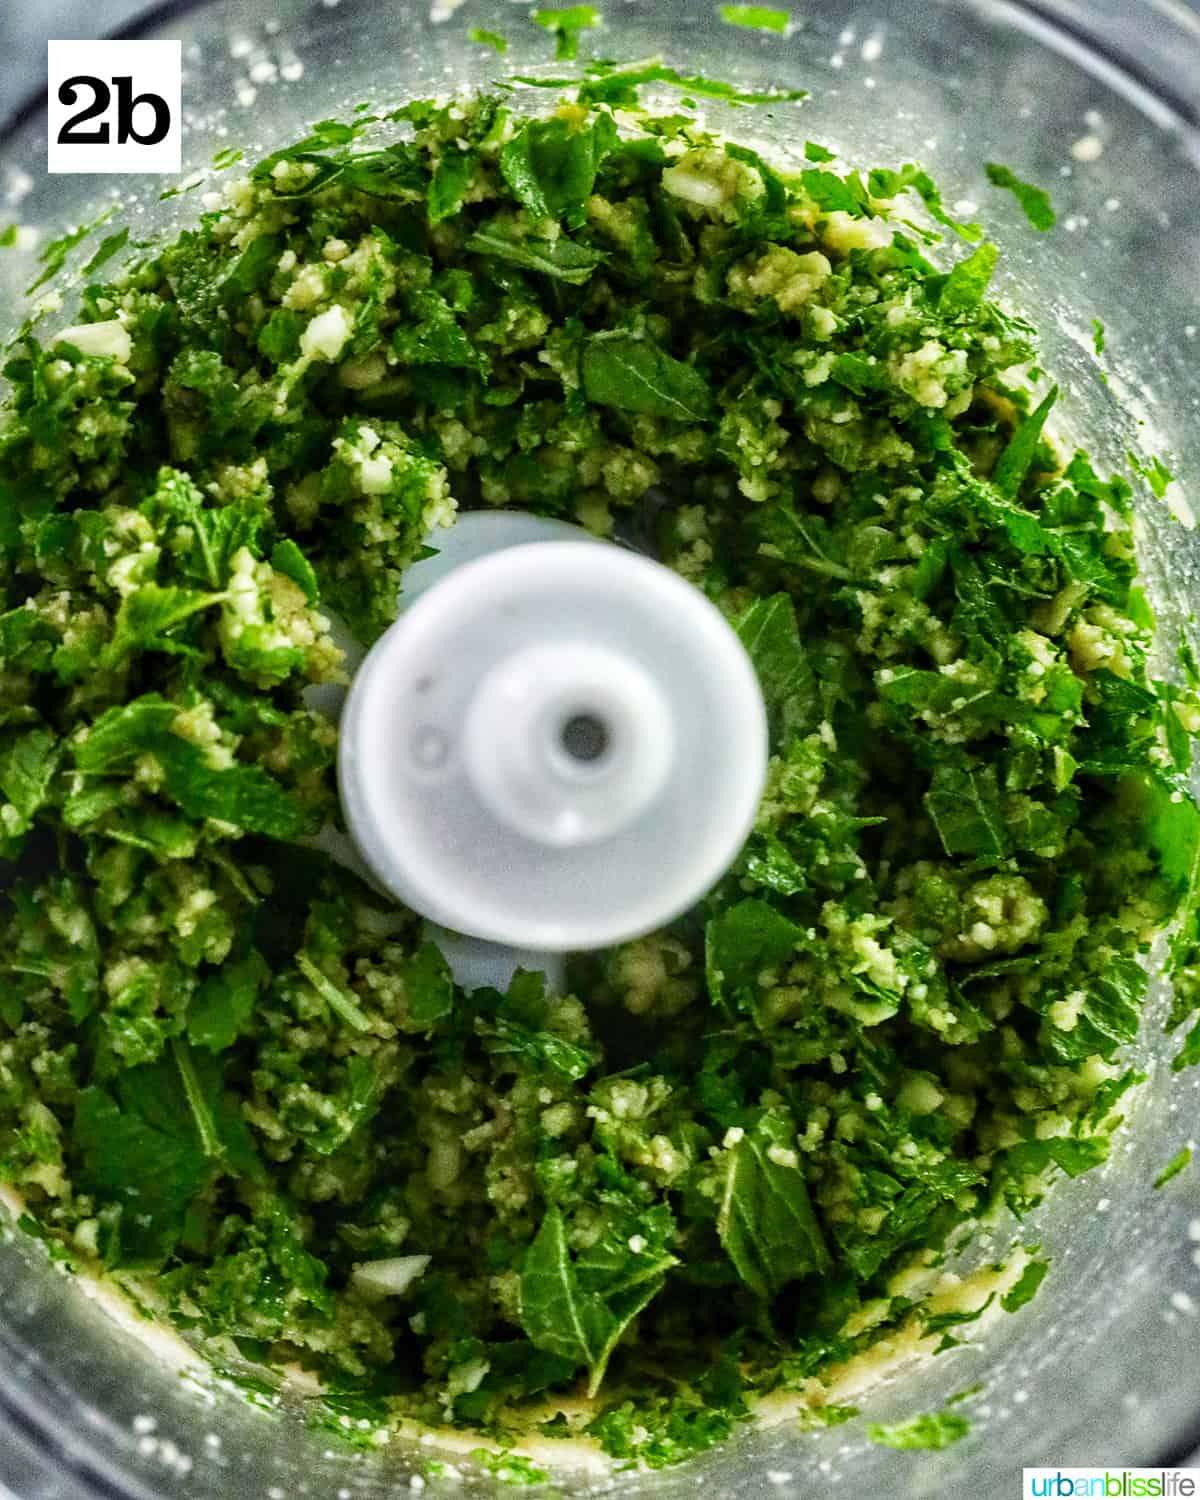 food processor with mostly processed mint pesto ingredients: mint, basil, garlic, parmesan, pine nuts.